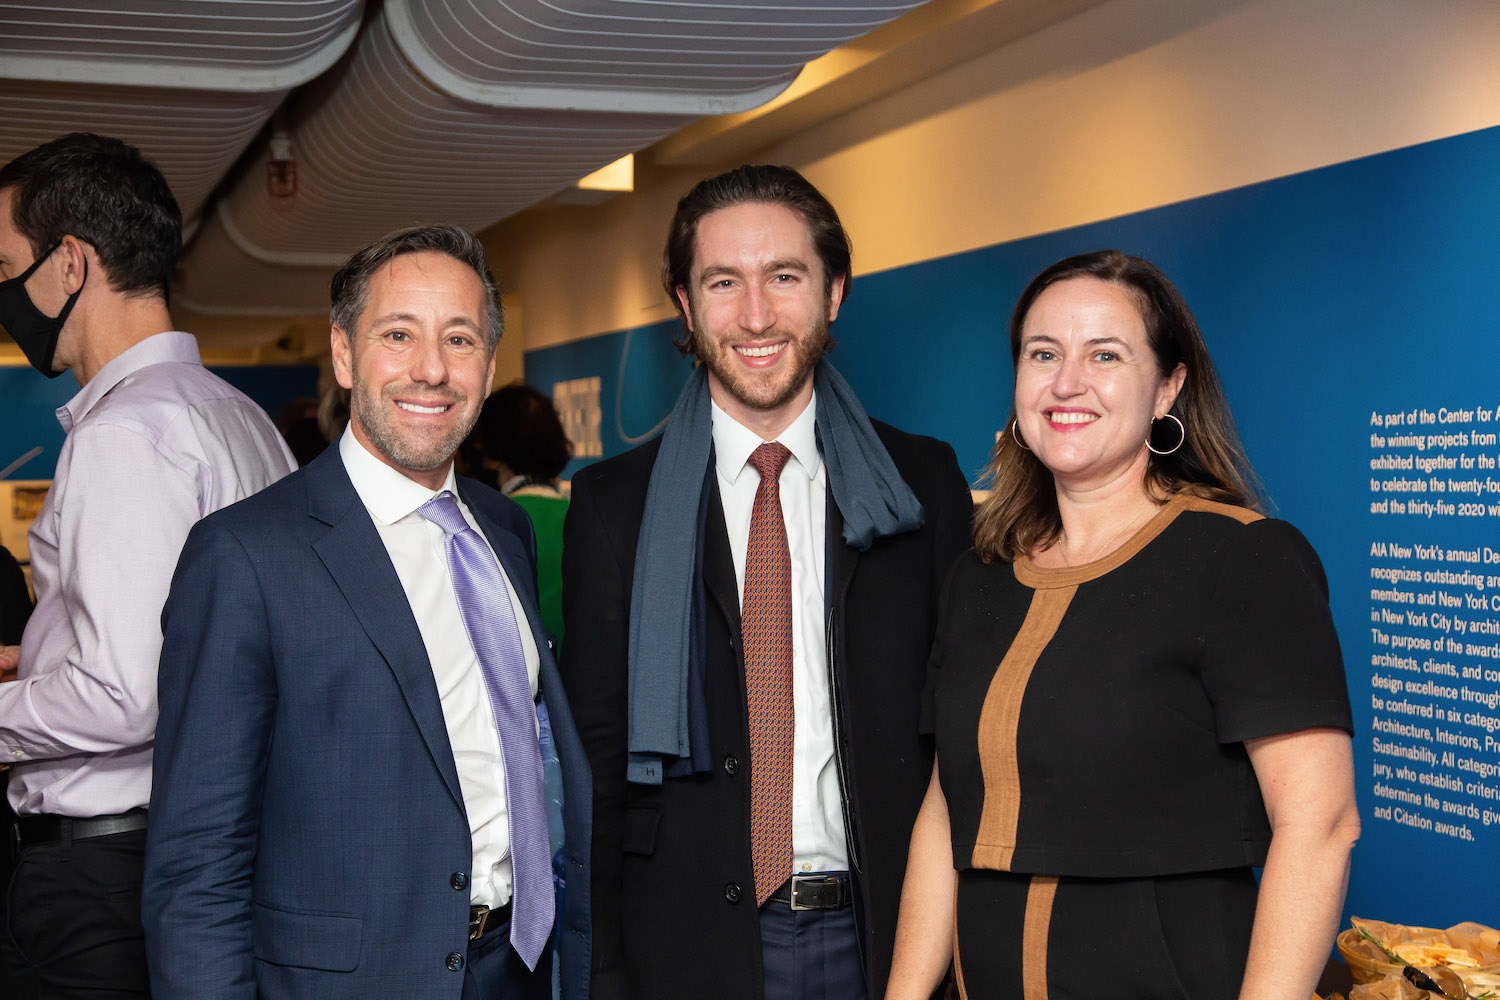 From left to right: WMF Trustee Anthony Thompson, WMF Junior Board Member Adam Kulewicz, and Bénédicte de Montlaur.